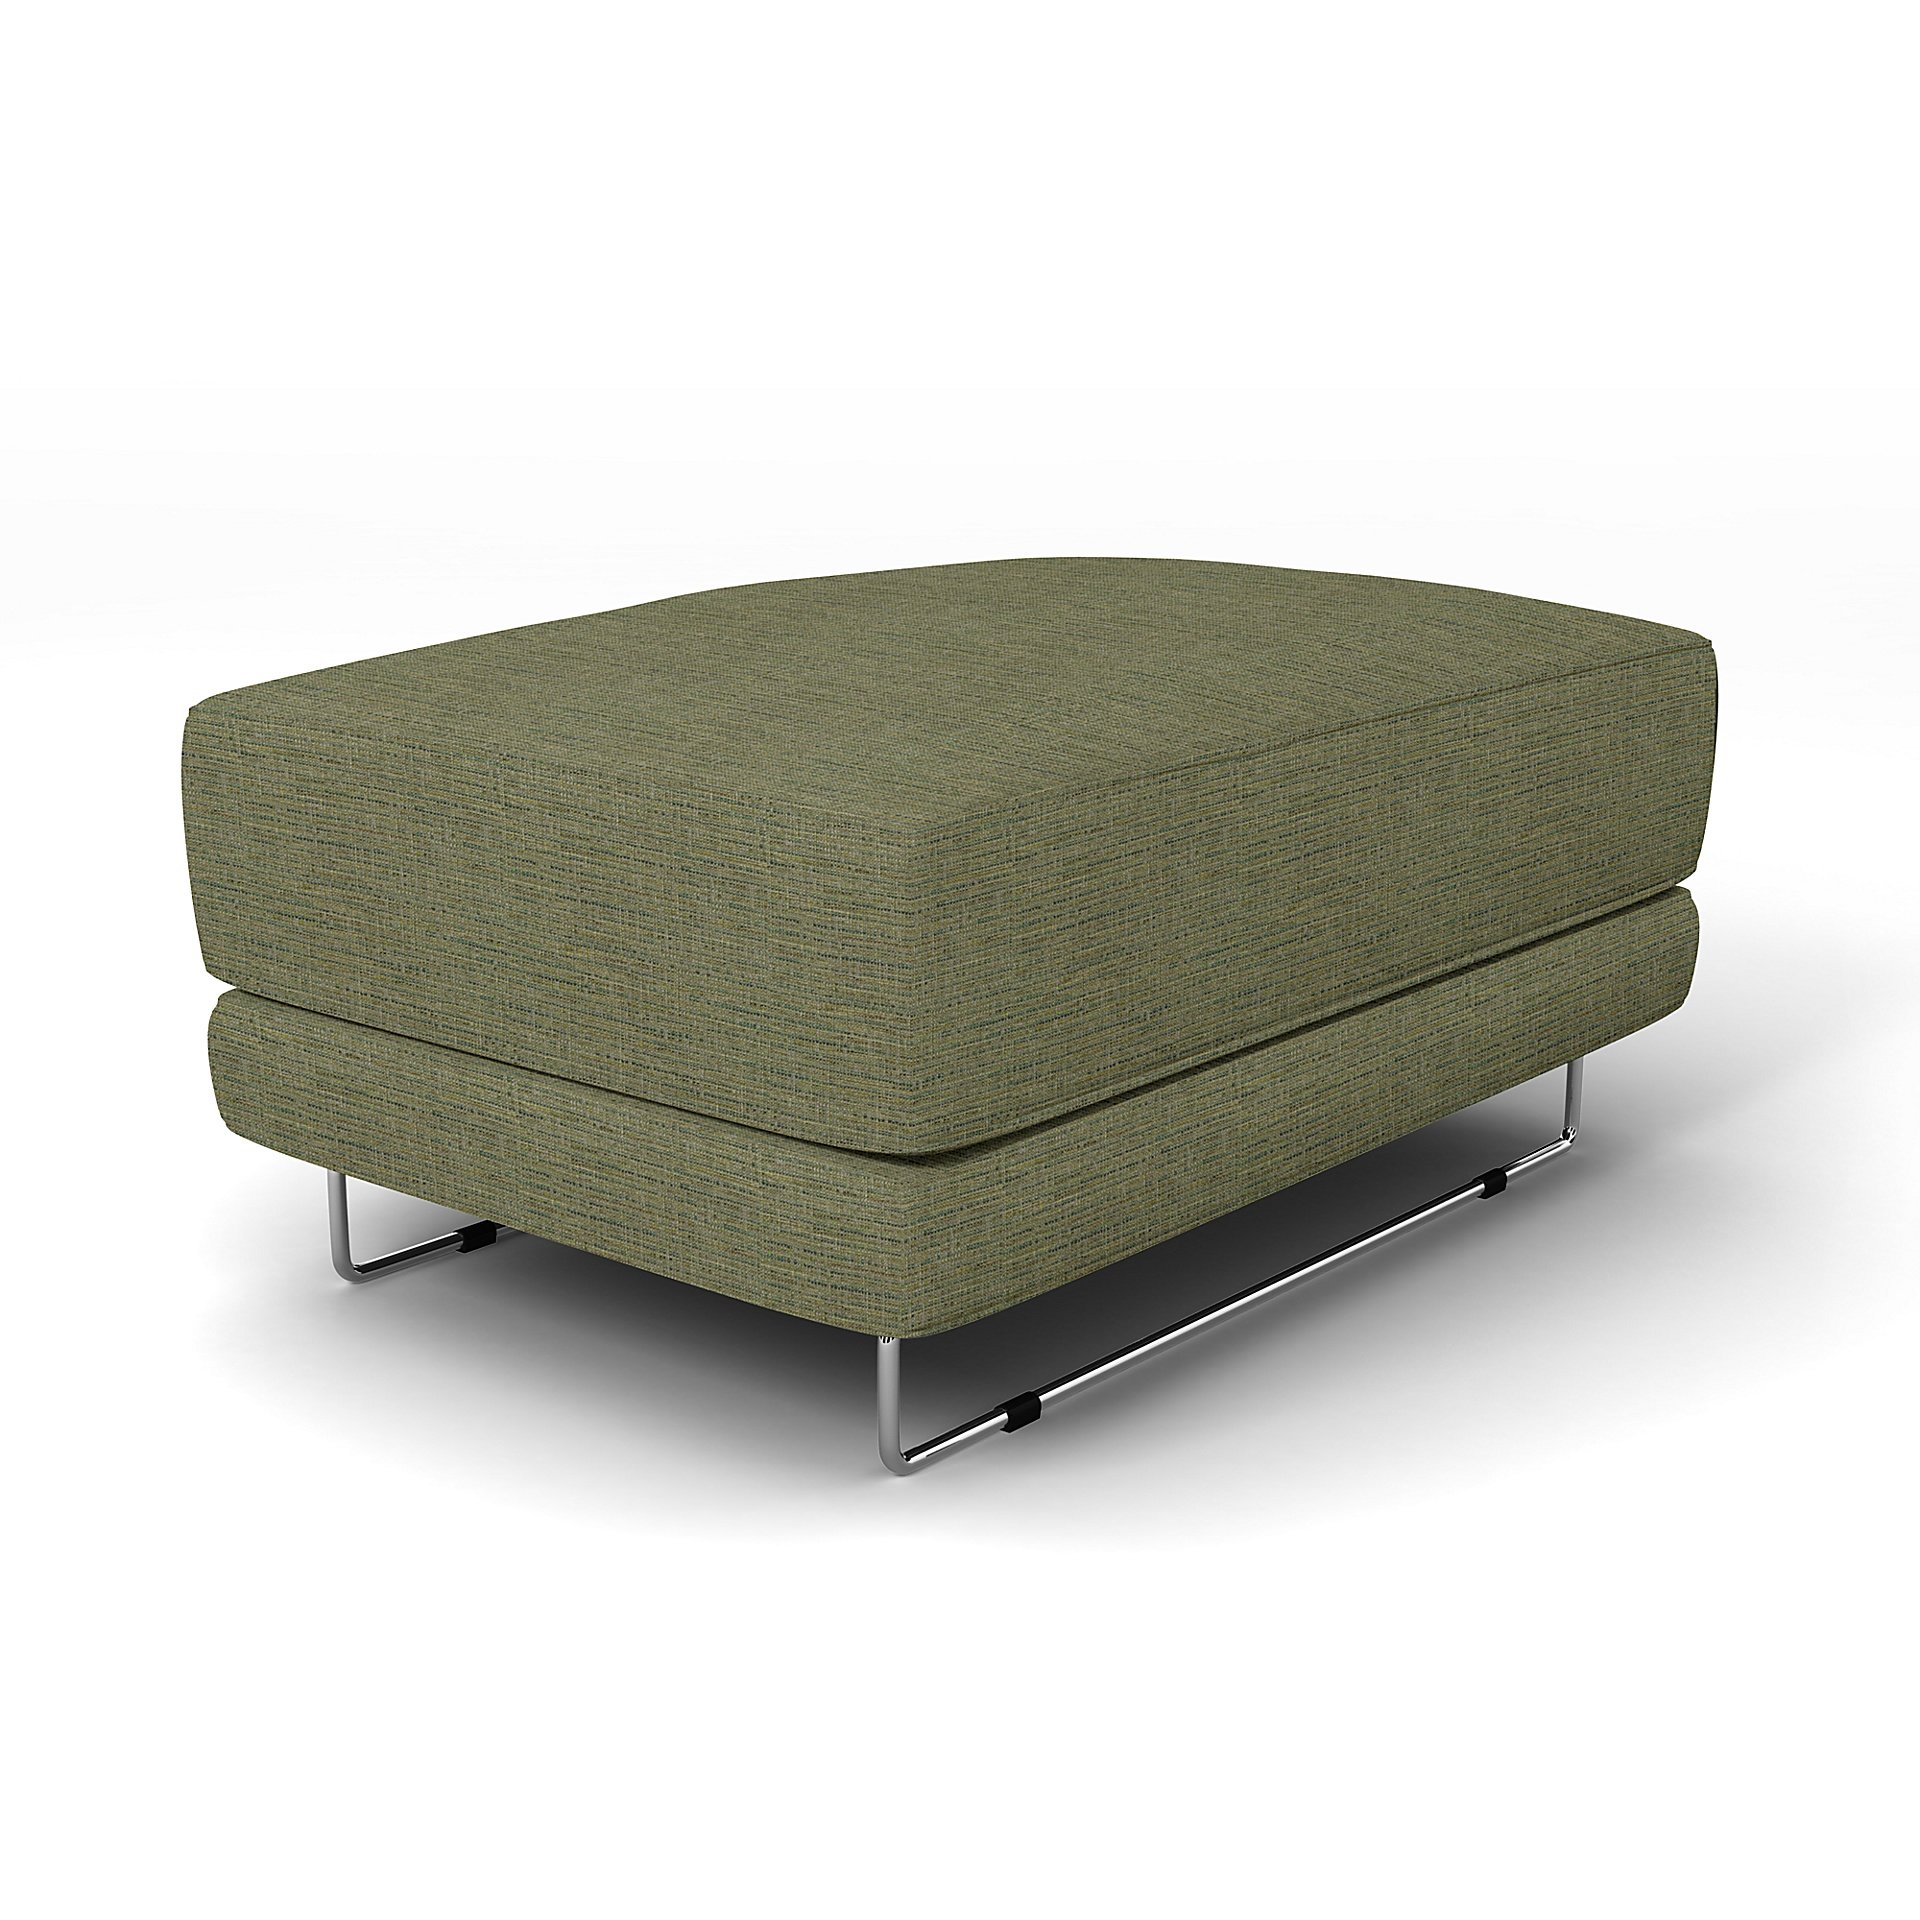 IKEA - Tylosand Footstool Cover, Meadow Green, Boucle & Texture - Bemz